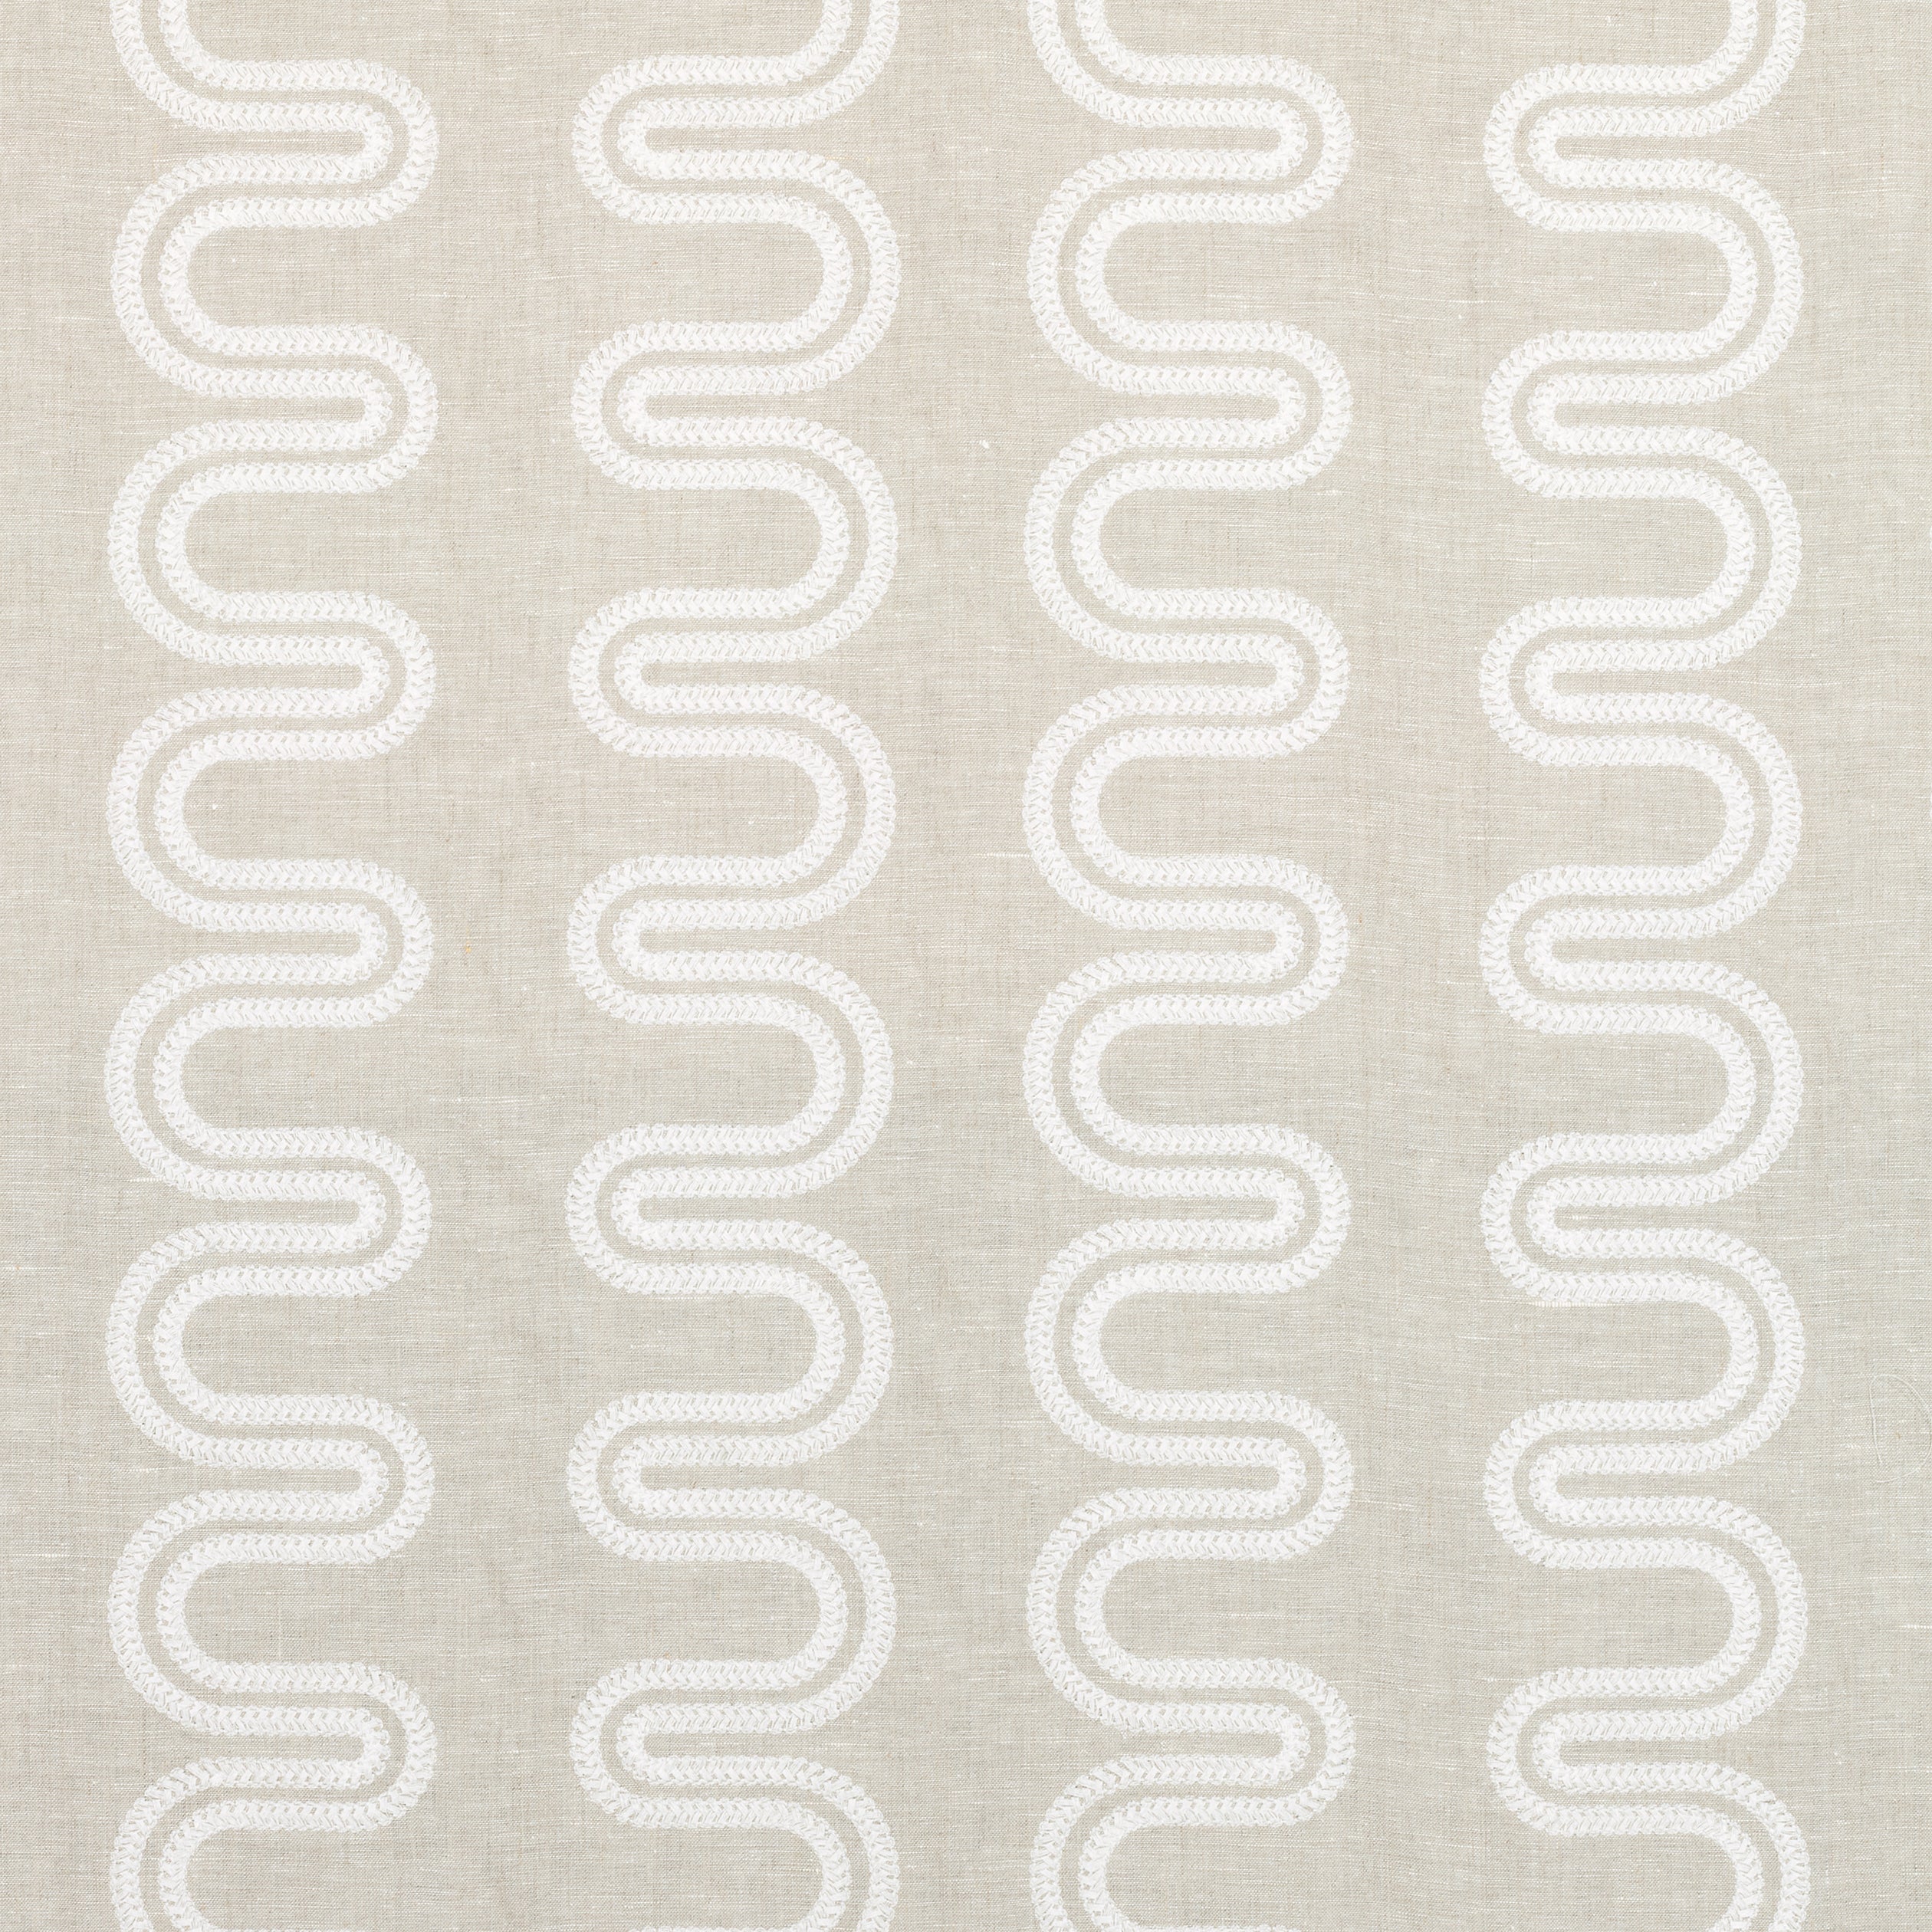 Herriot Way Embroidery fabric in white on flax  color - pattern number AF9639 - by Anna French in the Savoy collection